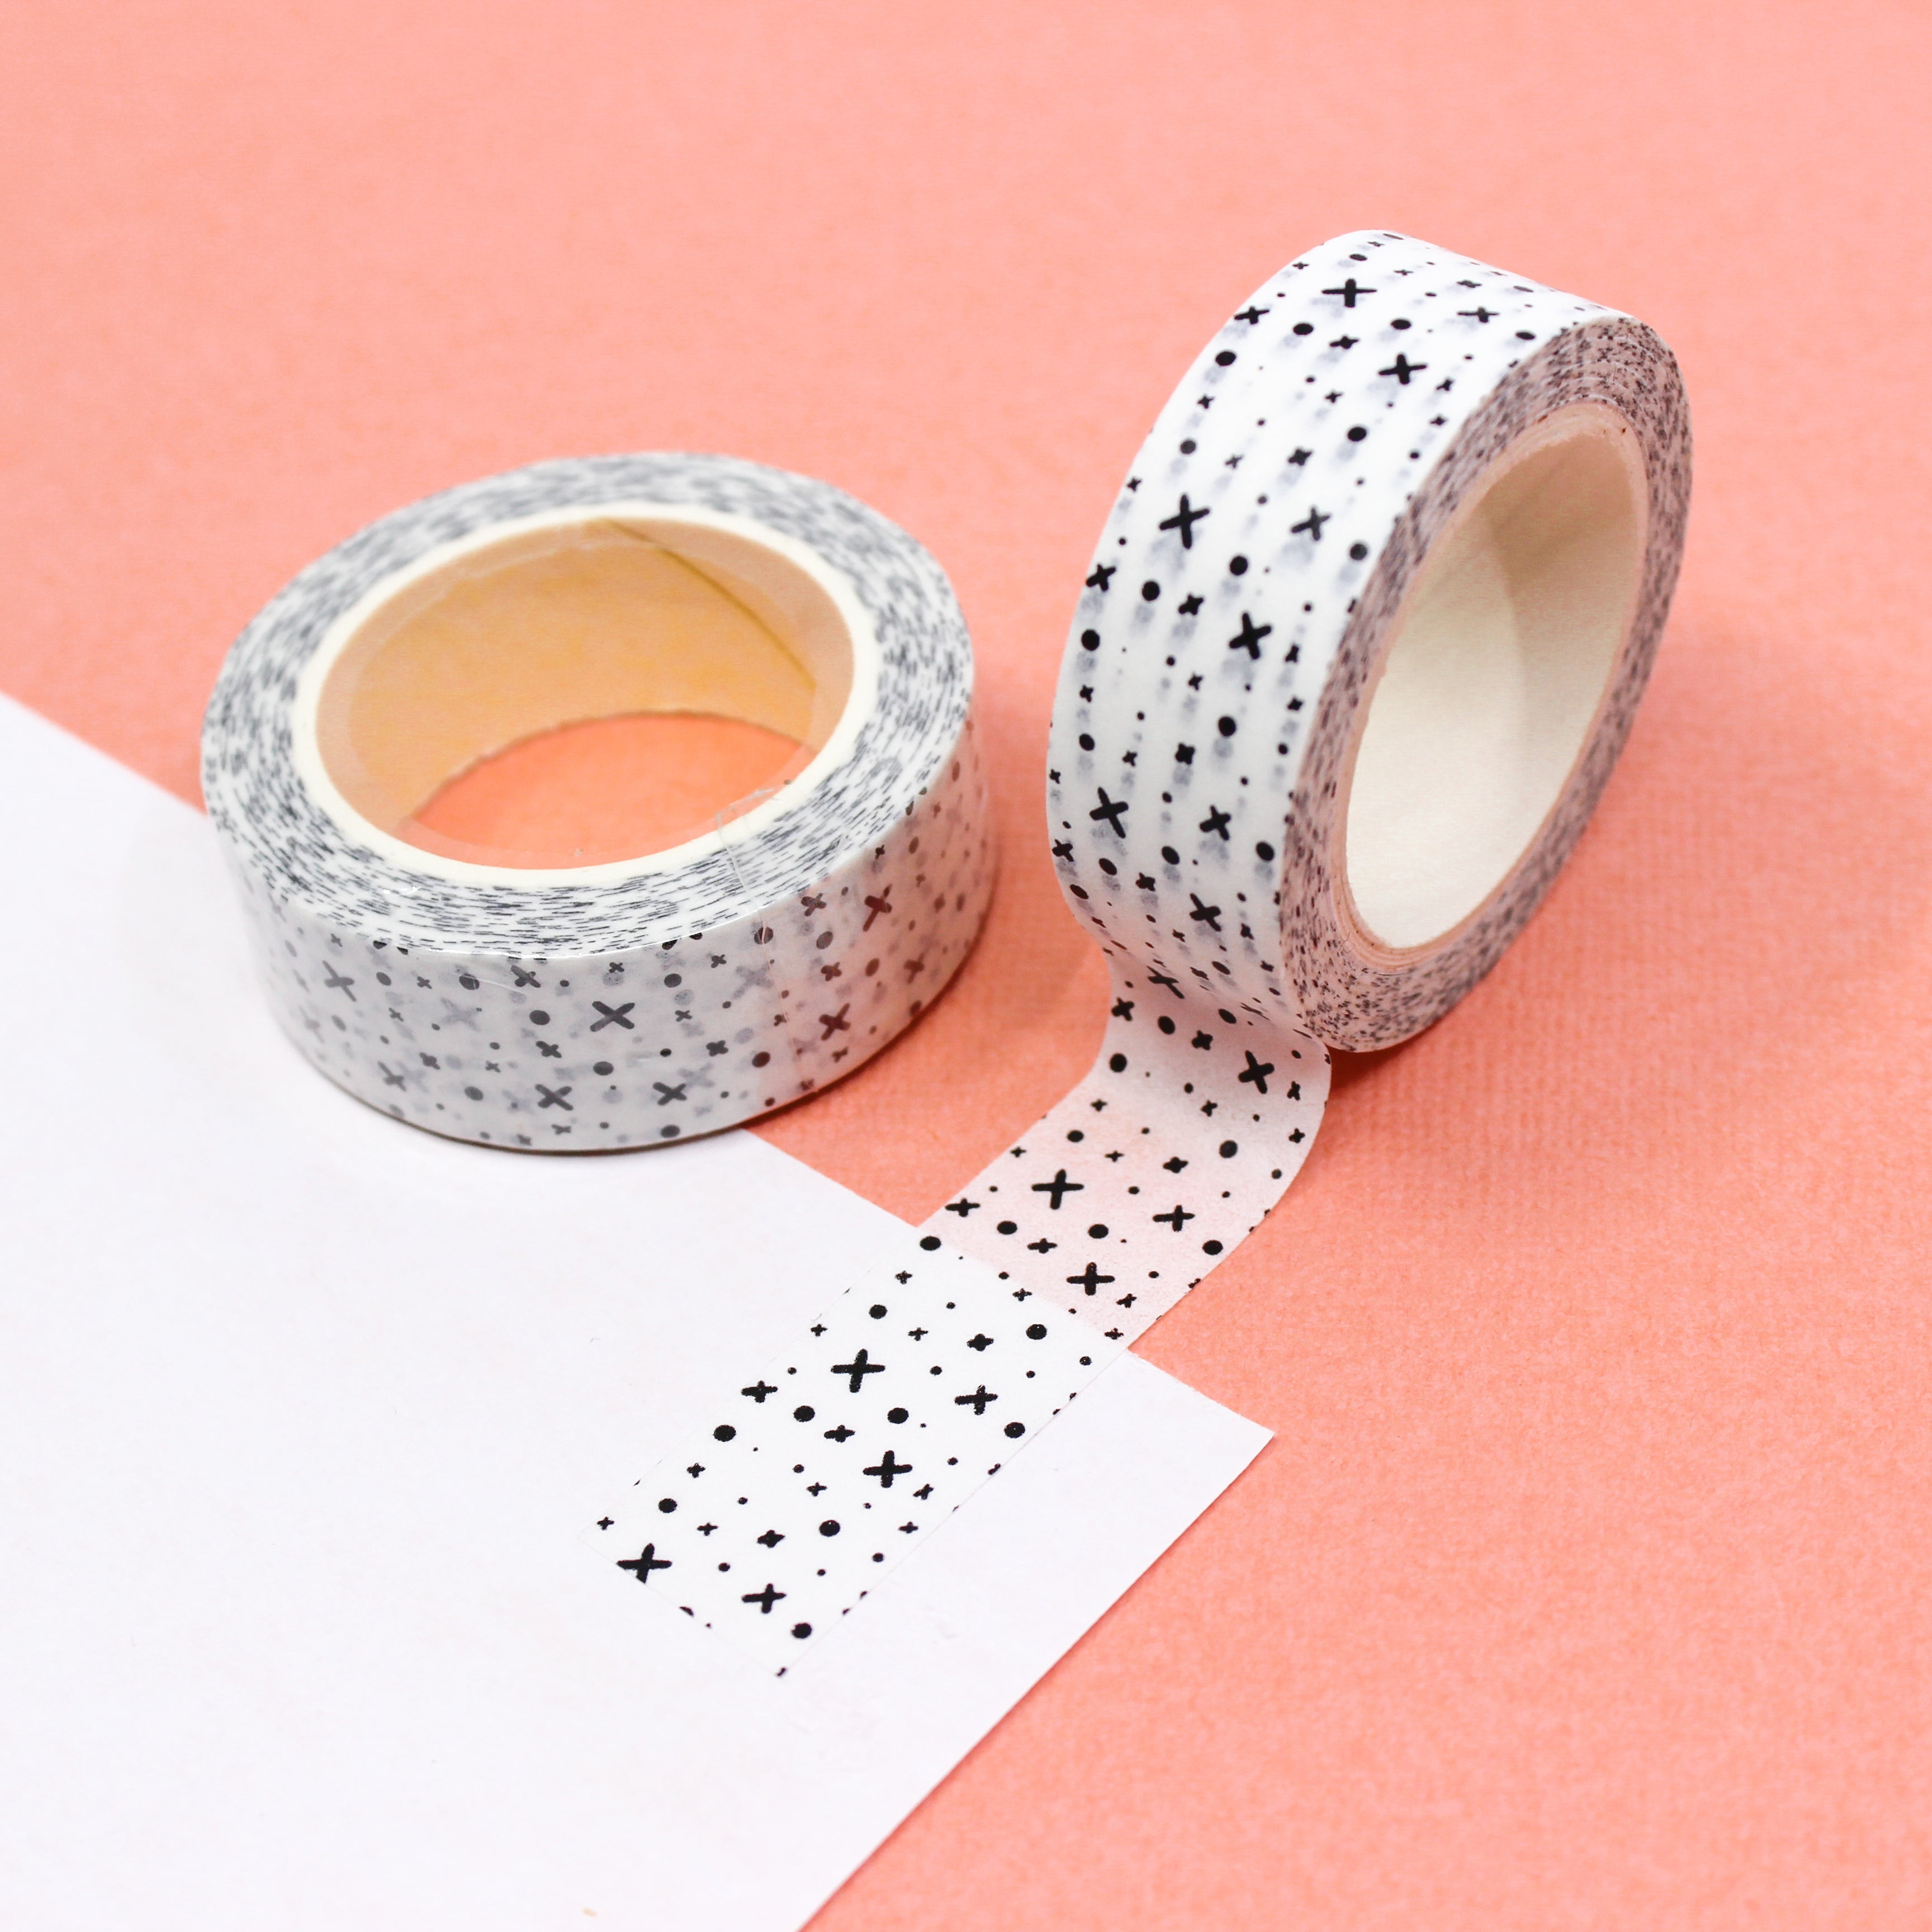 This photo is our black and white graphic pattern washi tape roll. It is sold at BBB Supplies Craft Shop.